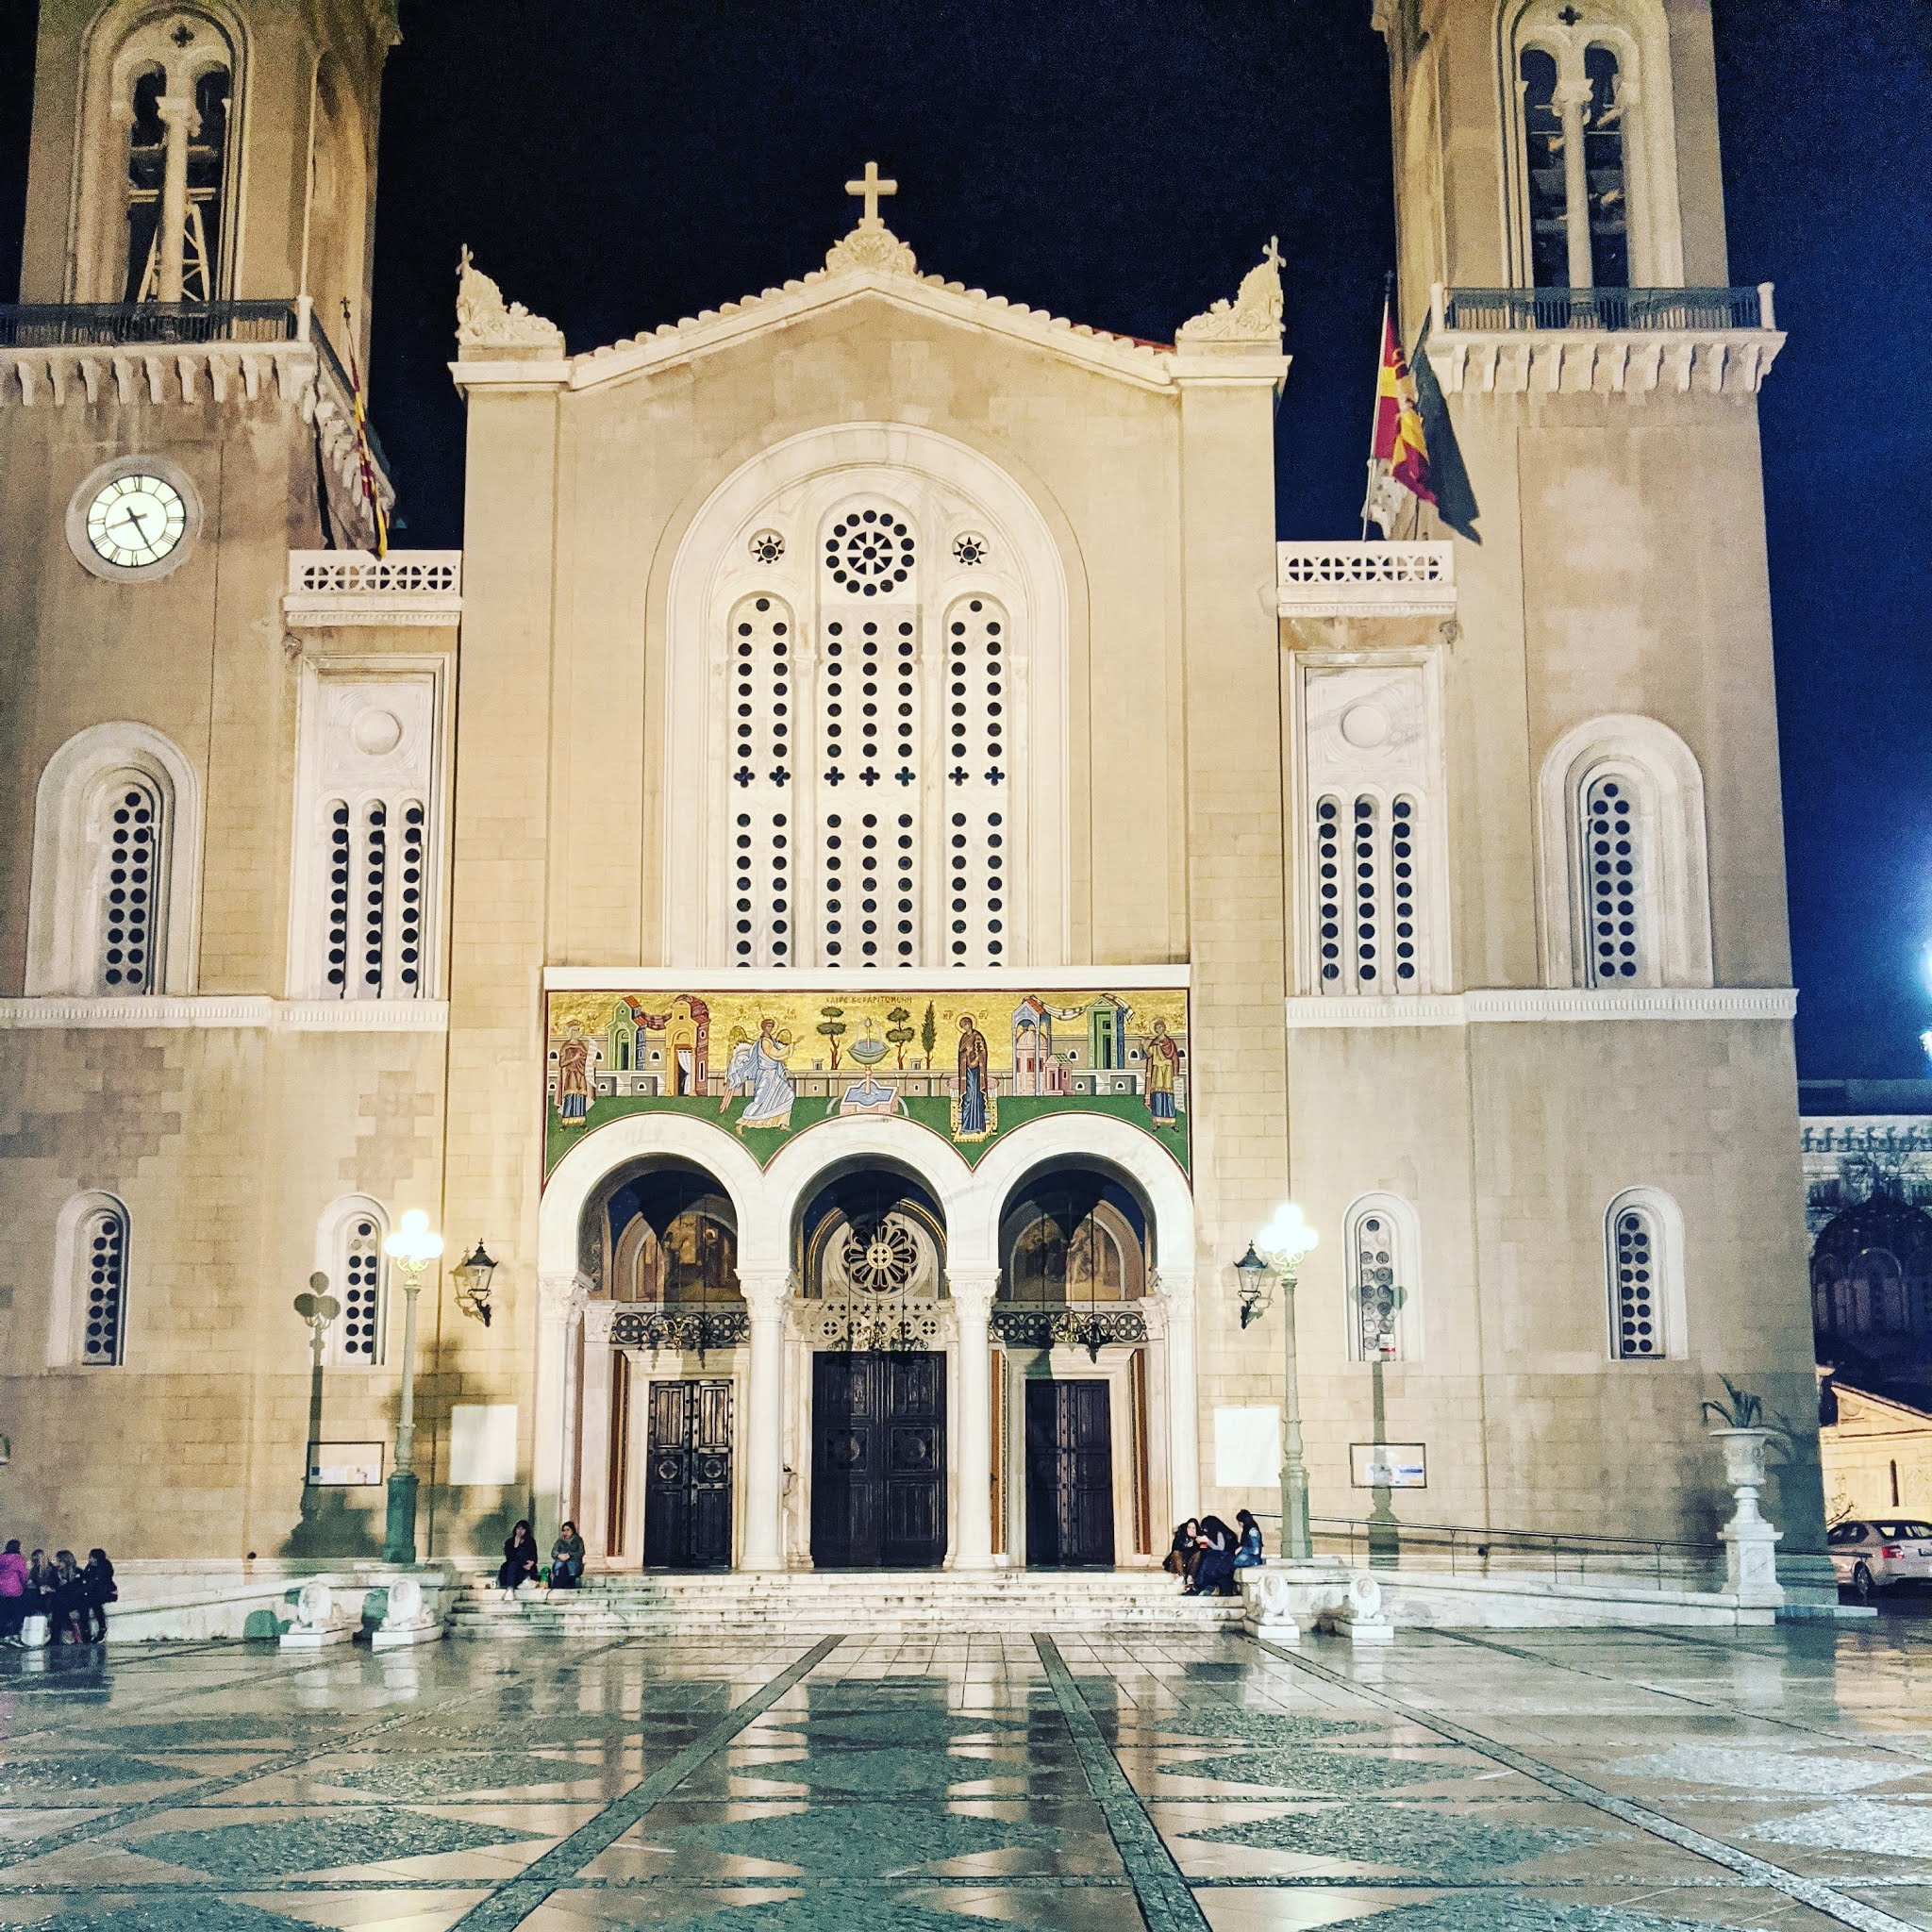 The Metropolitan Church of Athens at night, with beams of light shining down. It's one of the best things to see during a weekend in athens